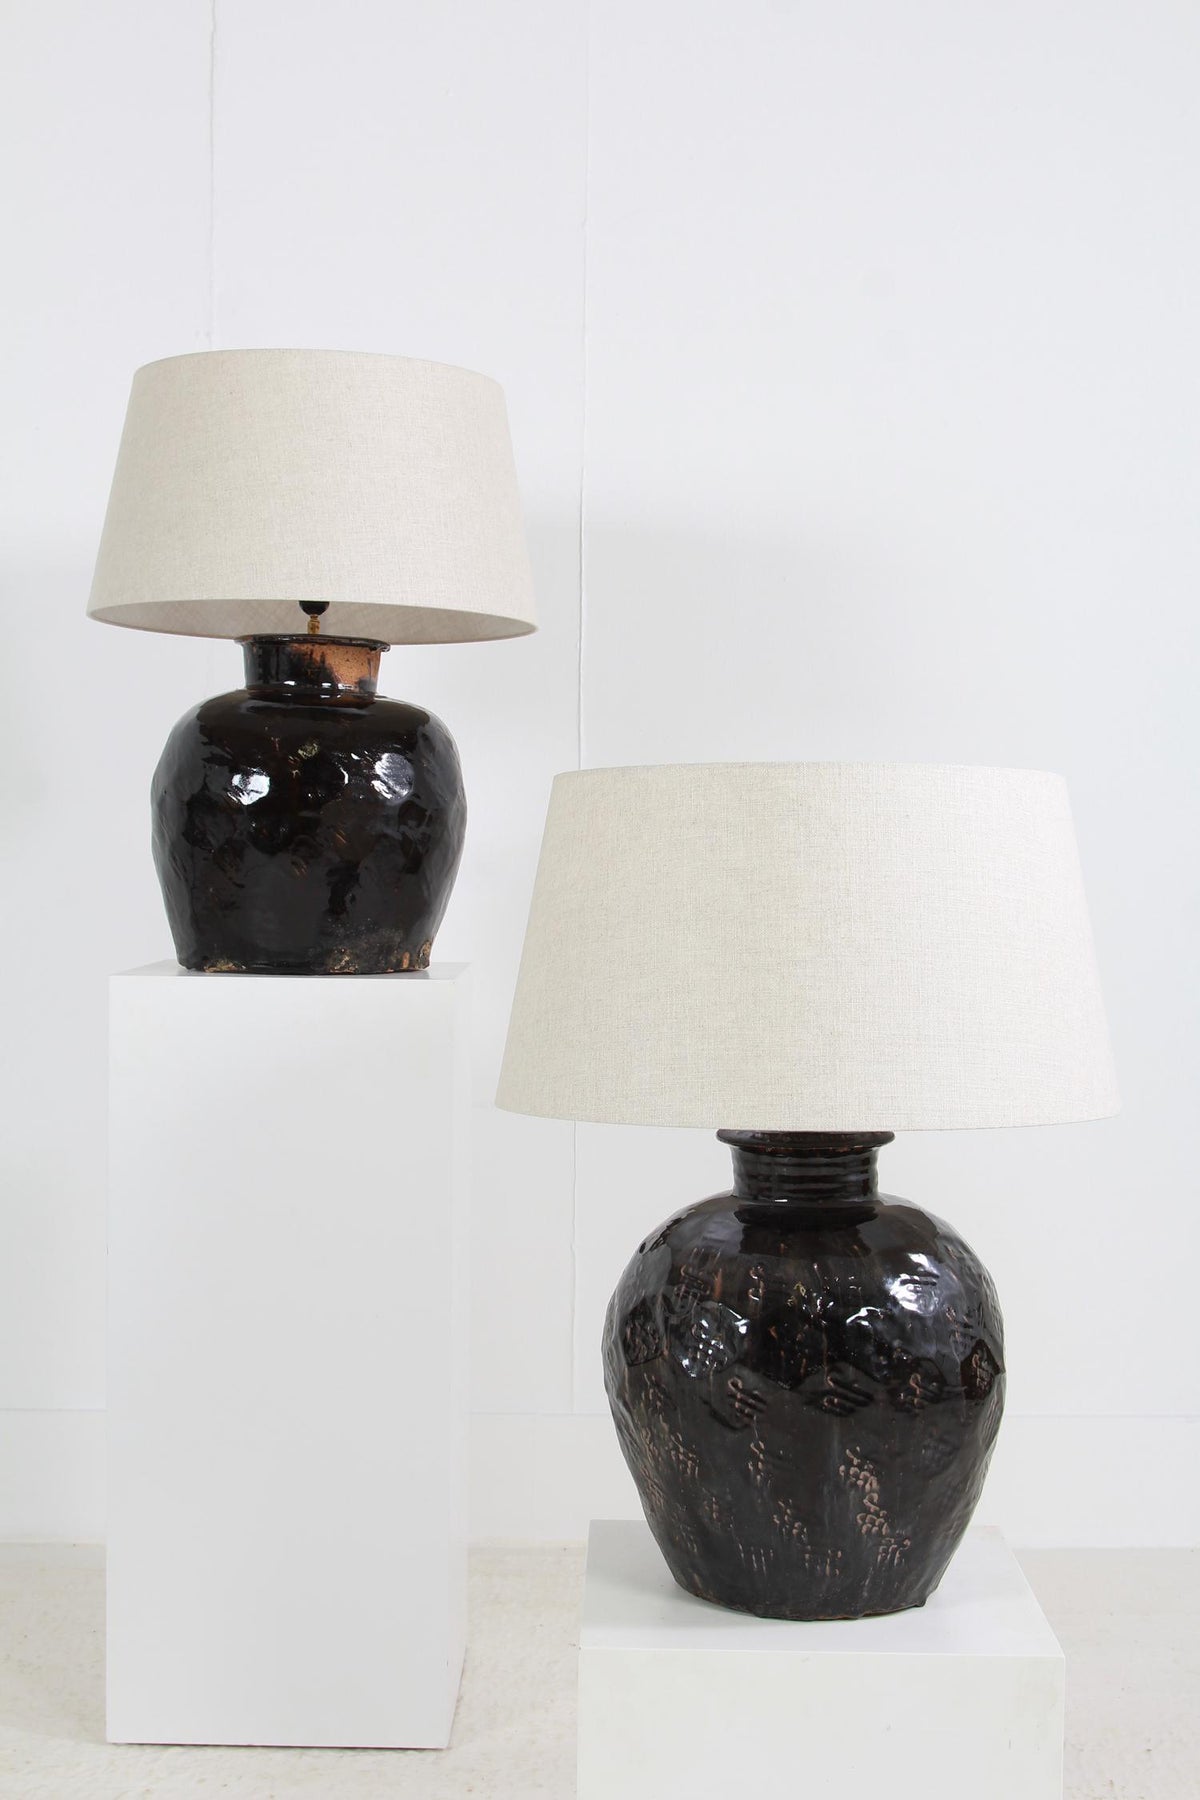 ANTIQUE BLACK GLAZED POTTERY LAMPS WITH WHITE DRUM LINEN SHADES